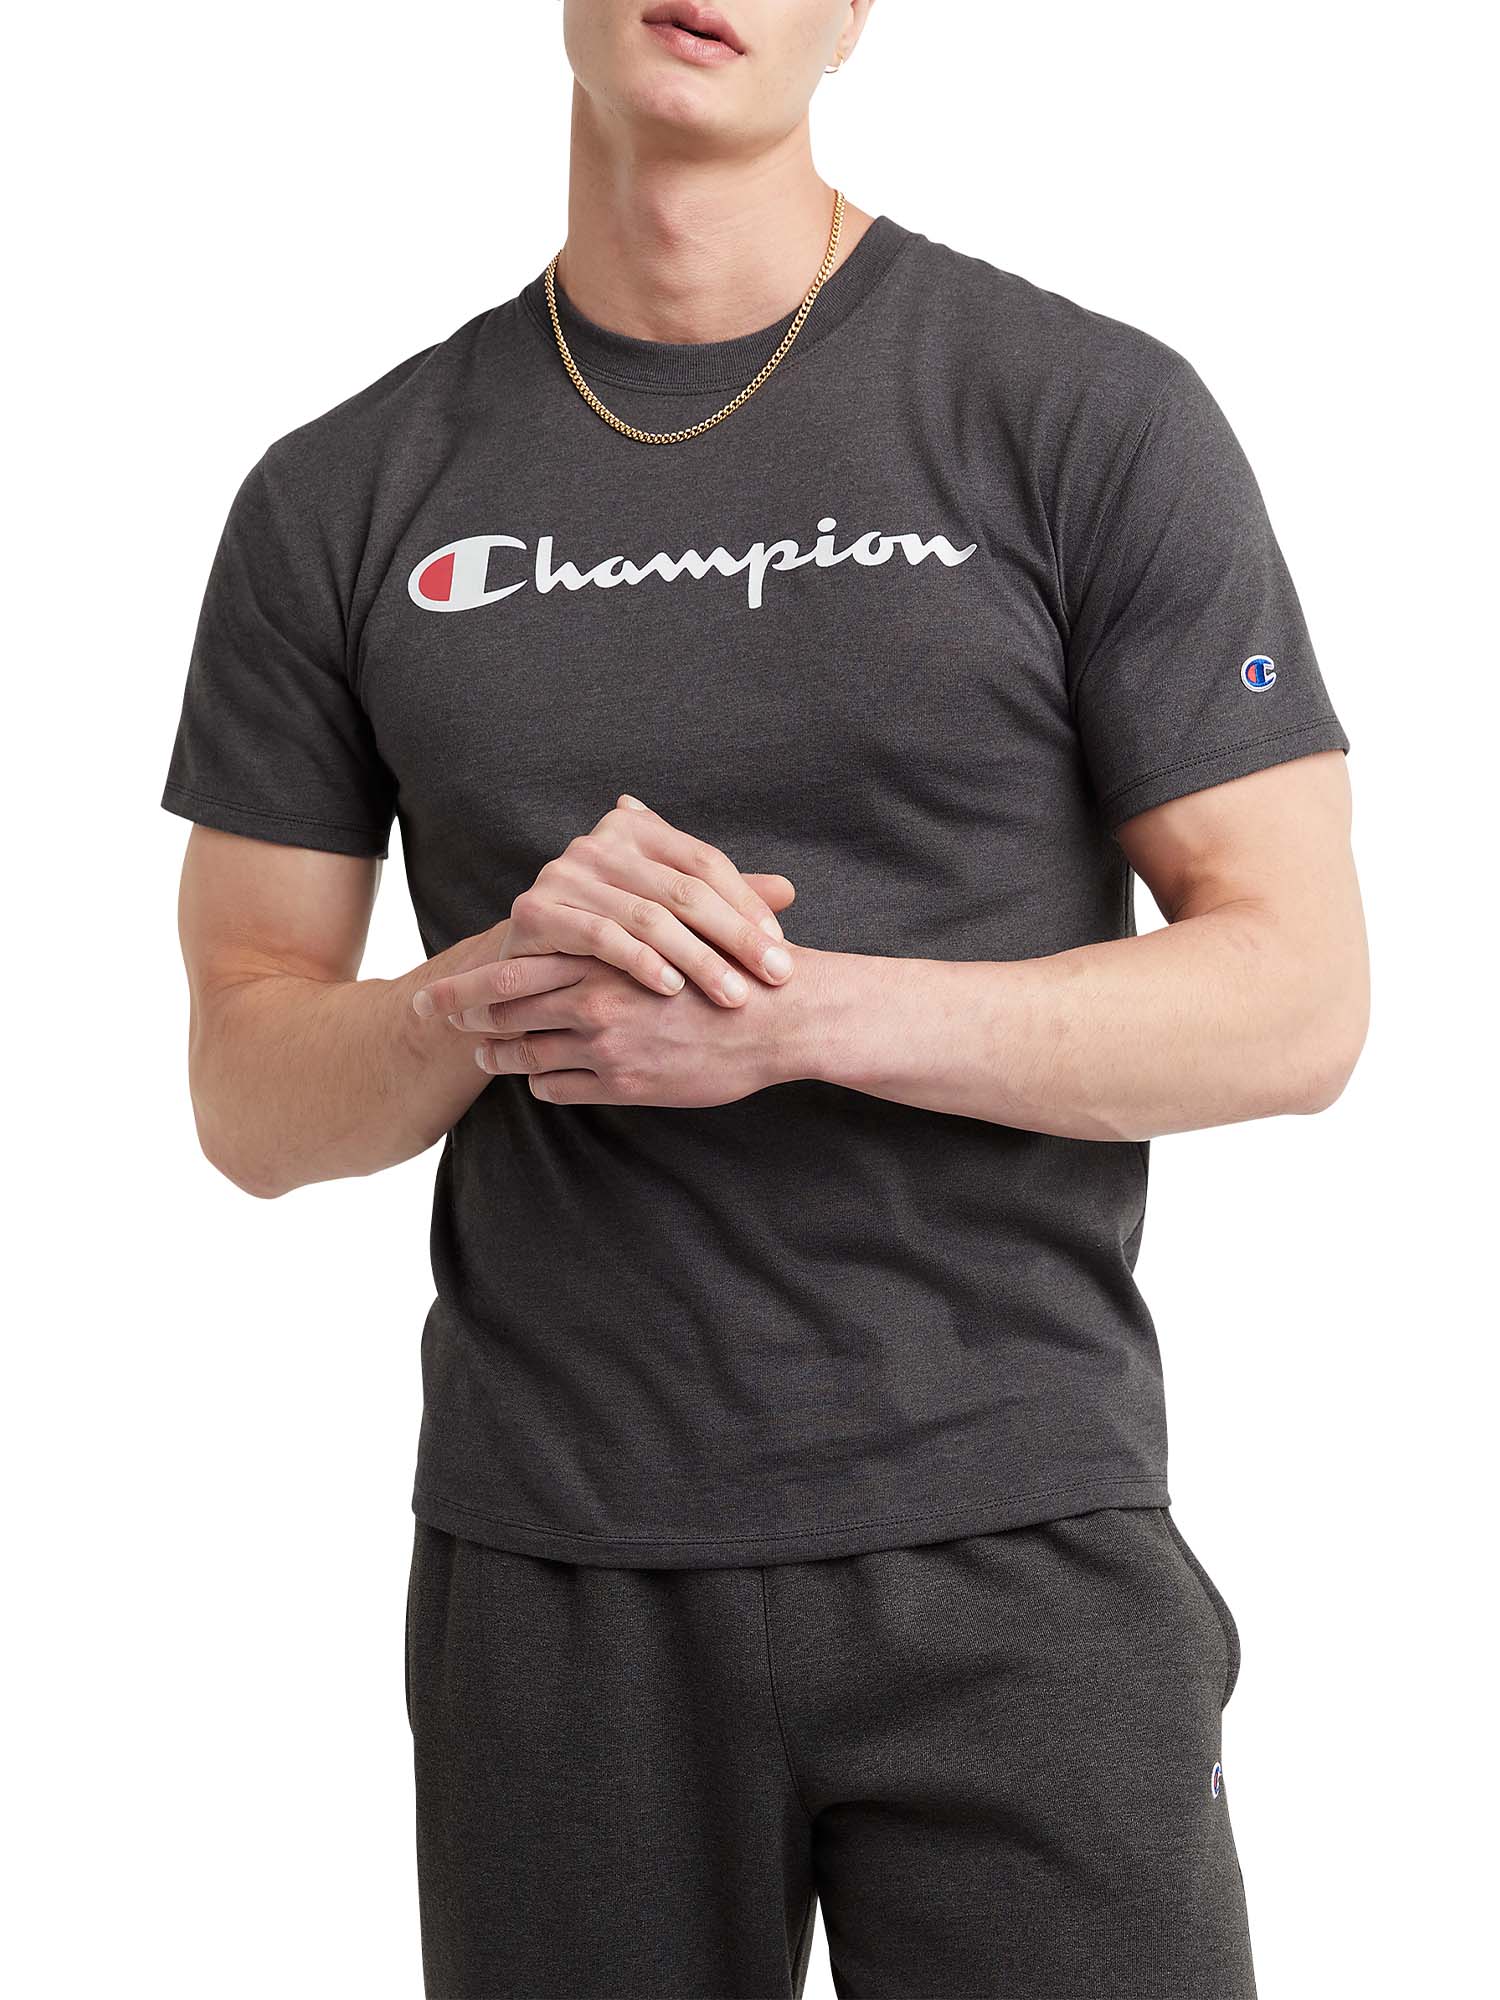 Champion Men's and Big Men's Script Logo Classic Jersey Graphic Tee Shirt, Sizes S-2XL - image 1 of 8